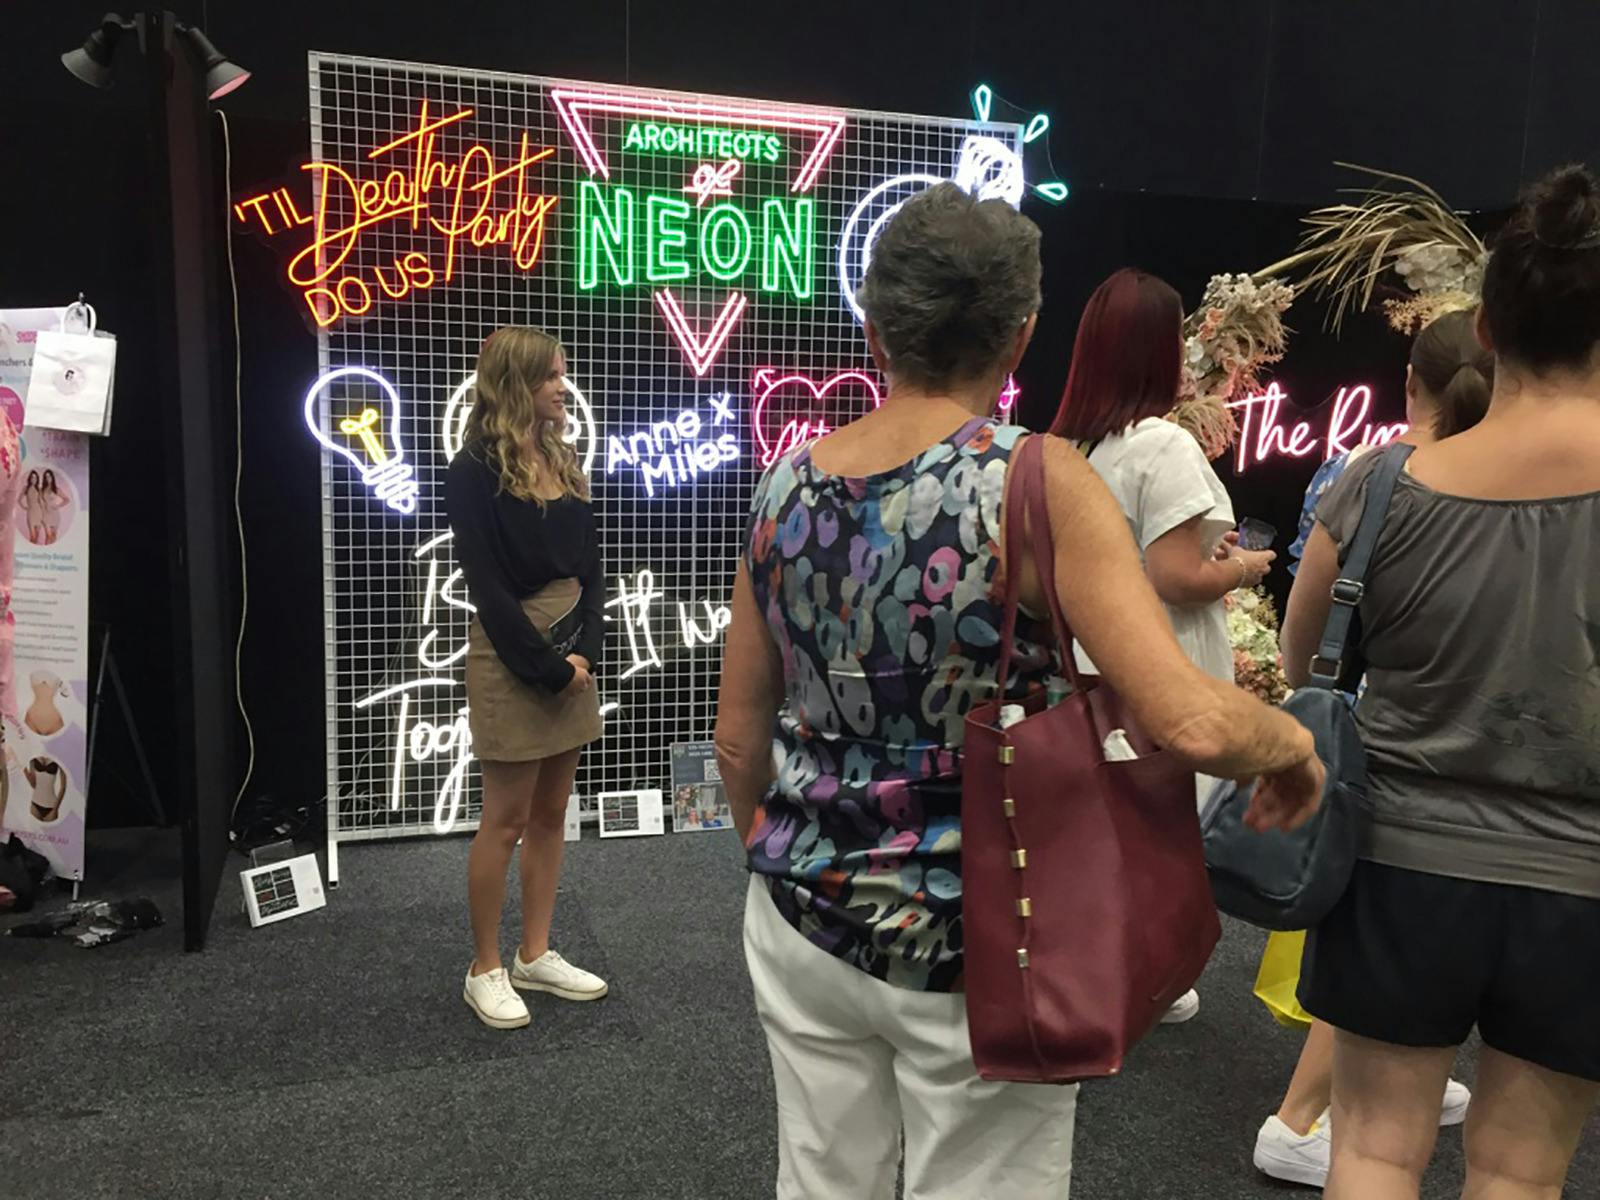 Unique and trending products such as neon signs at Your Local Wedding Guide Gold Coast Expo.